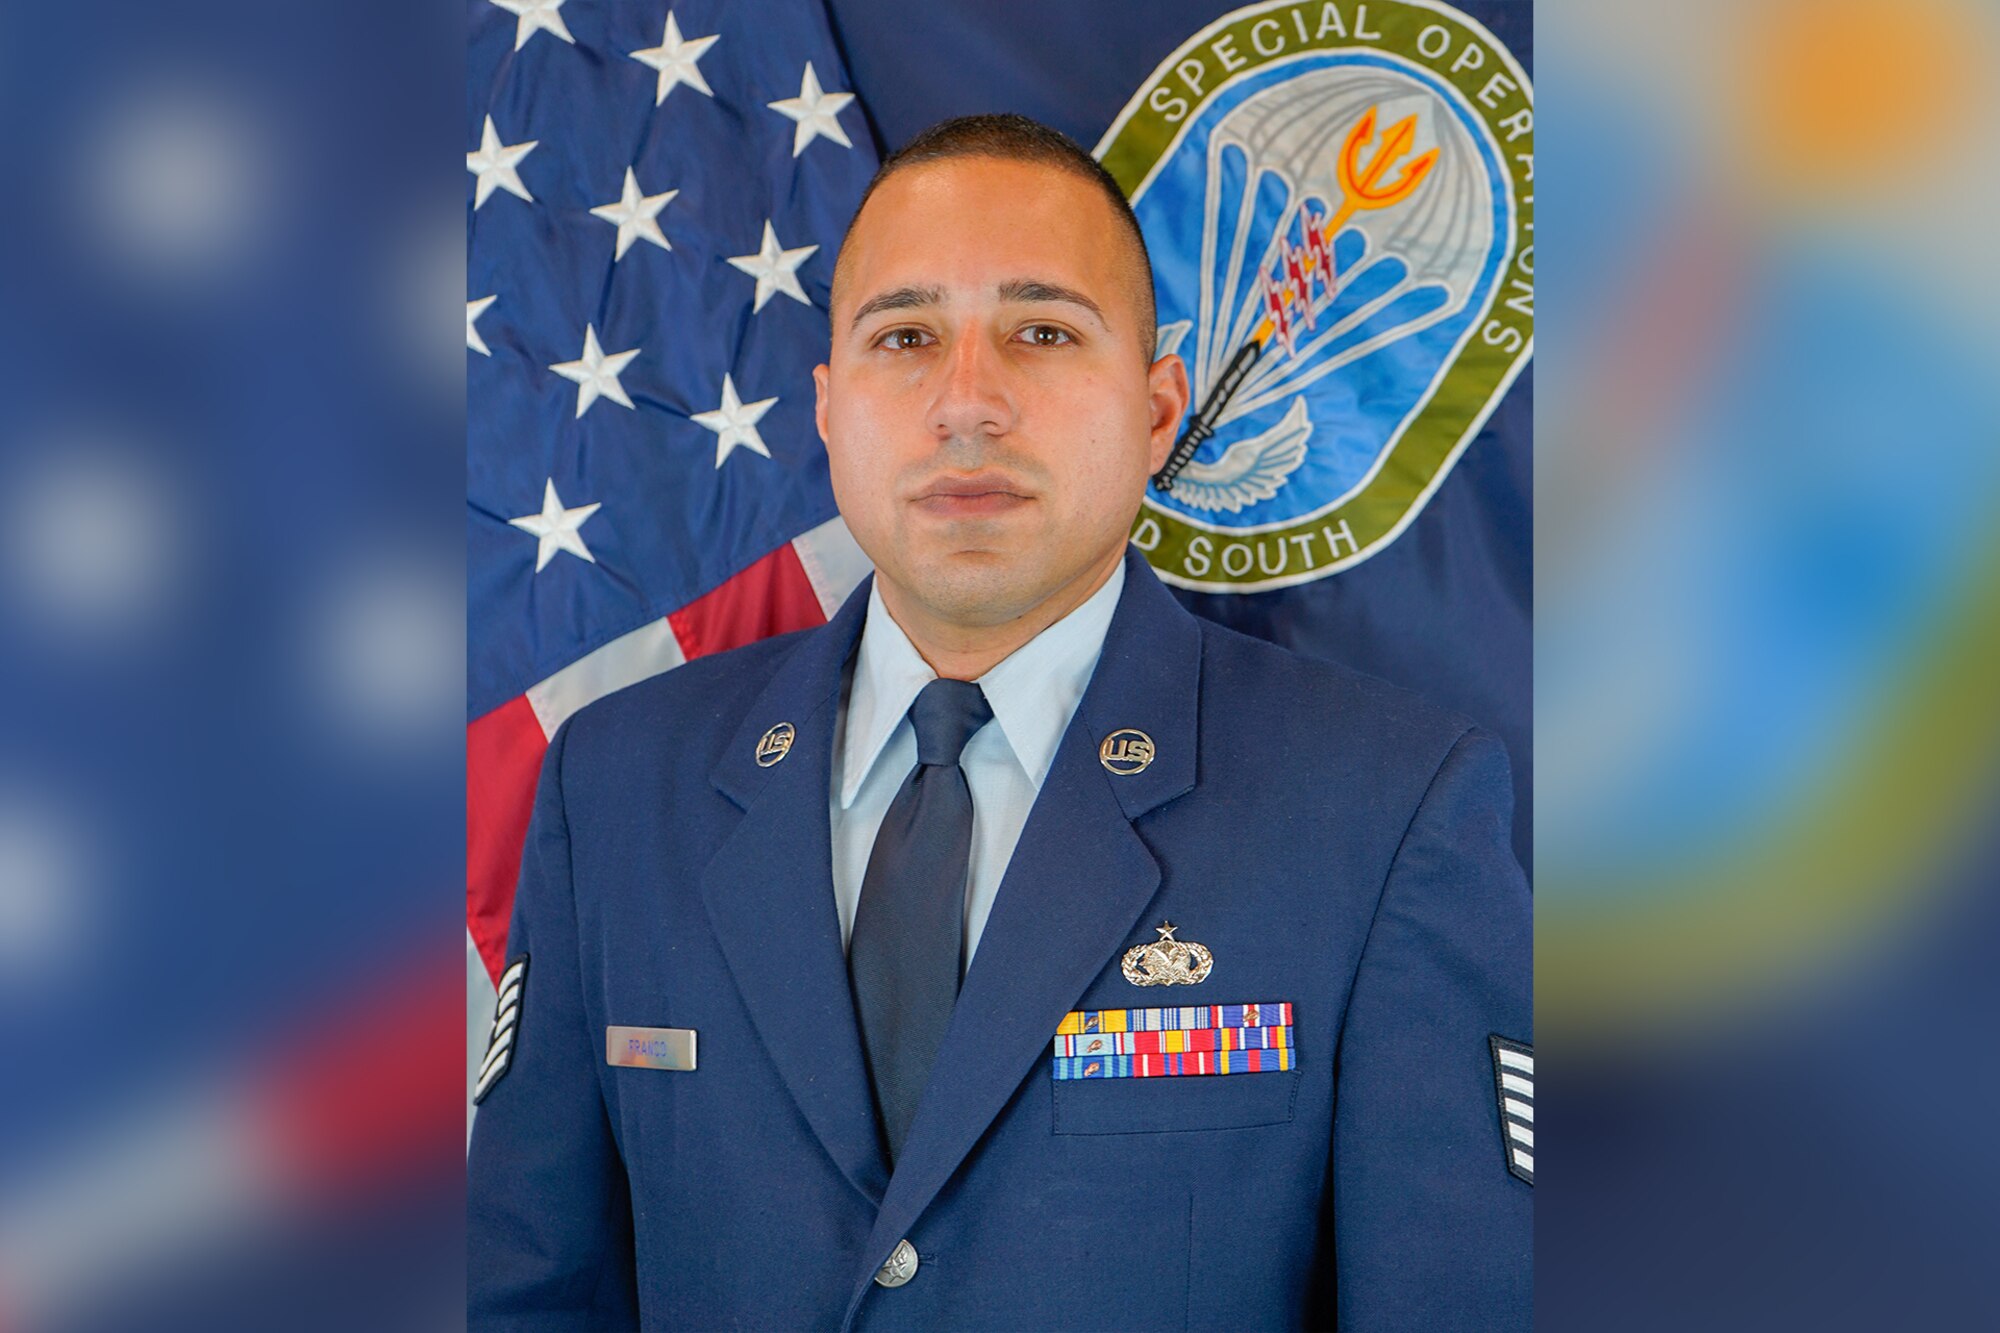 “In my opinion, having language enabled Airmen in our Air Force strengthens our capabilities across the globe,” Tech. Sgt. Emmanuel Franco-Heredia said. (Courtesy photo)